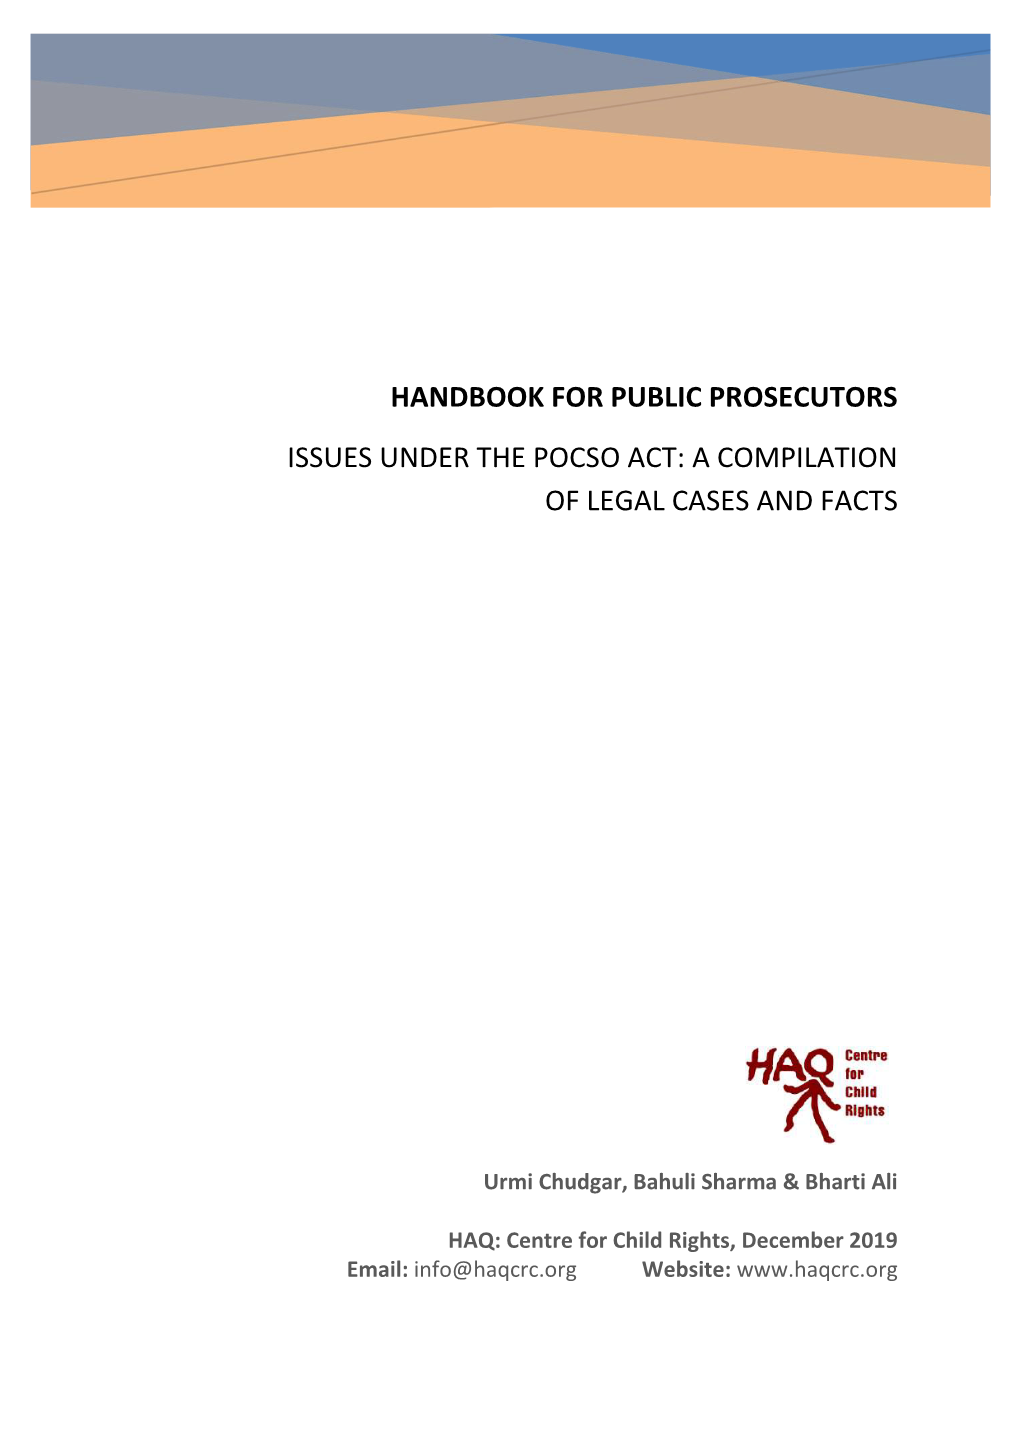 Handbook for Public Prosecutors Issues Under the Pocso Act: a Compilation of Legal Cases and Facts